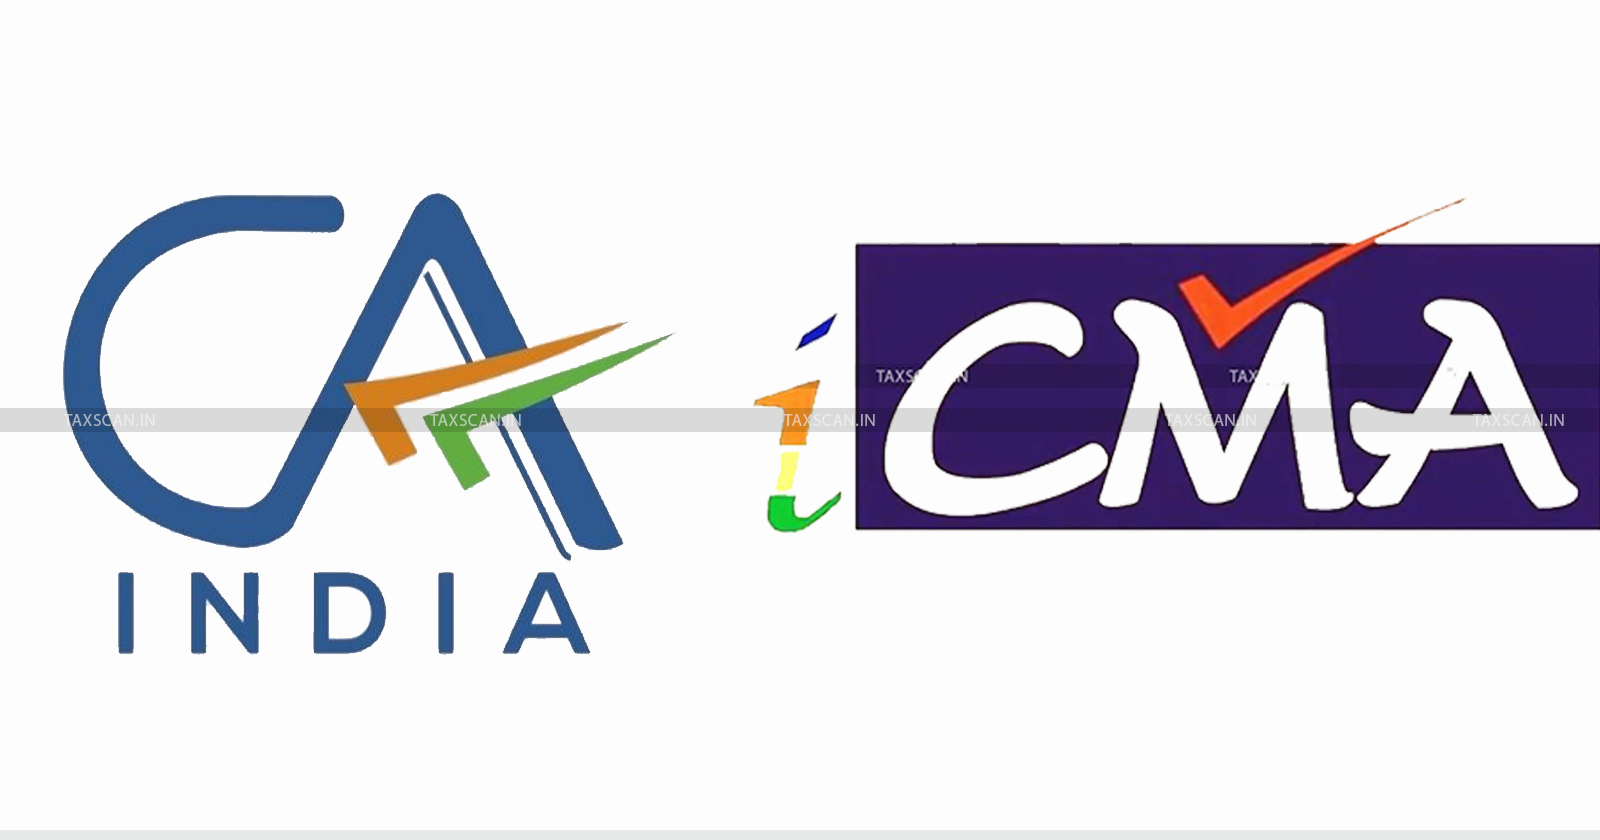 CA India Logo - Logo Accepted by Patents Authority - iCMA Logo - CA new logo - ICMA new logo - iCMA Logo Accepted - TAXSCAN